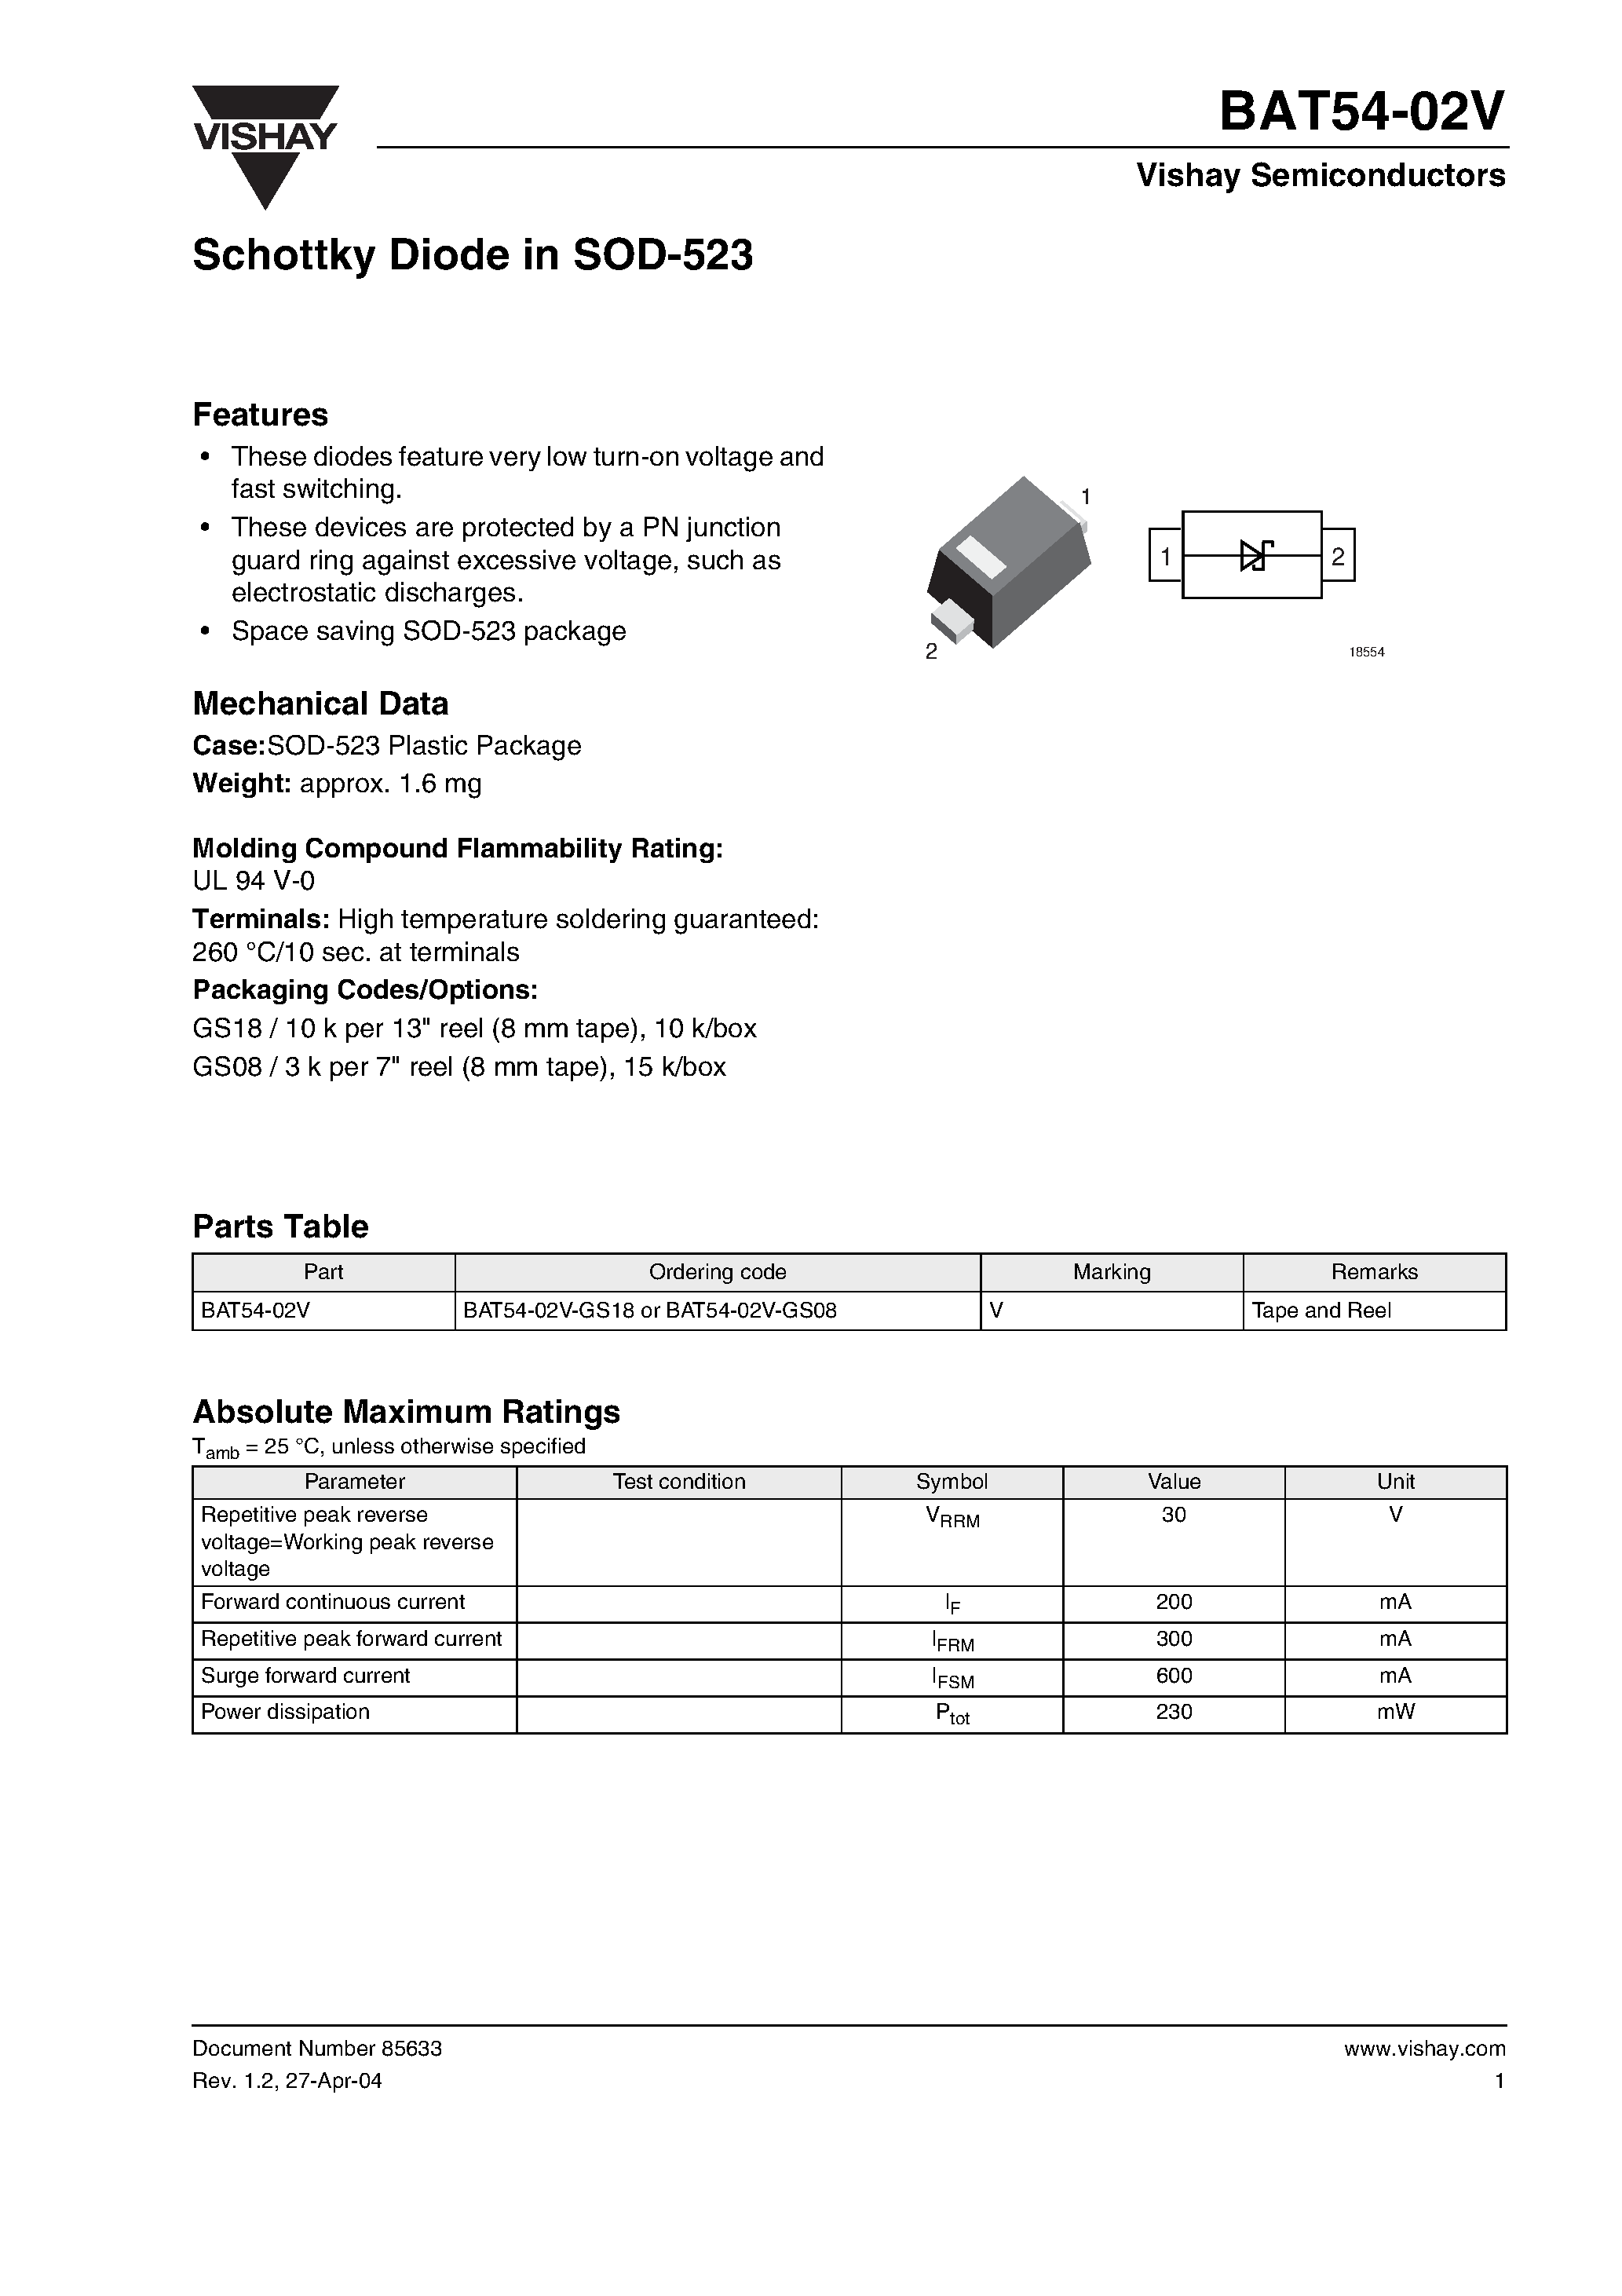 Datasheet BAT54-02V-GS18 - Schottky Diode in SOD-523 page 1